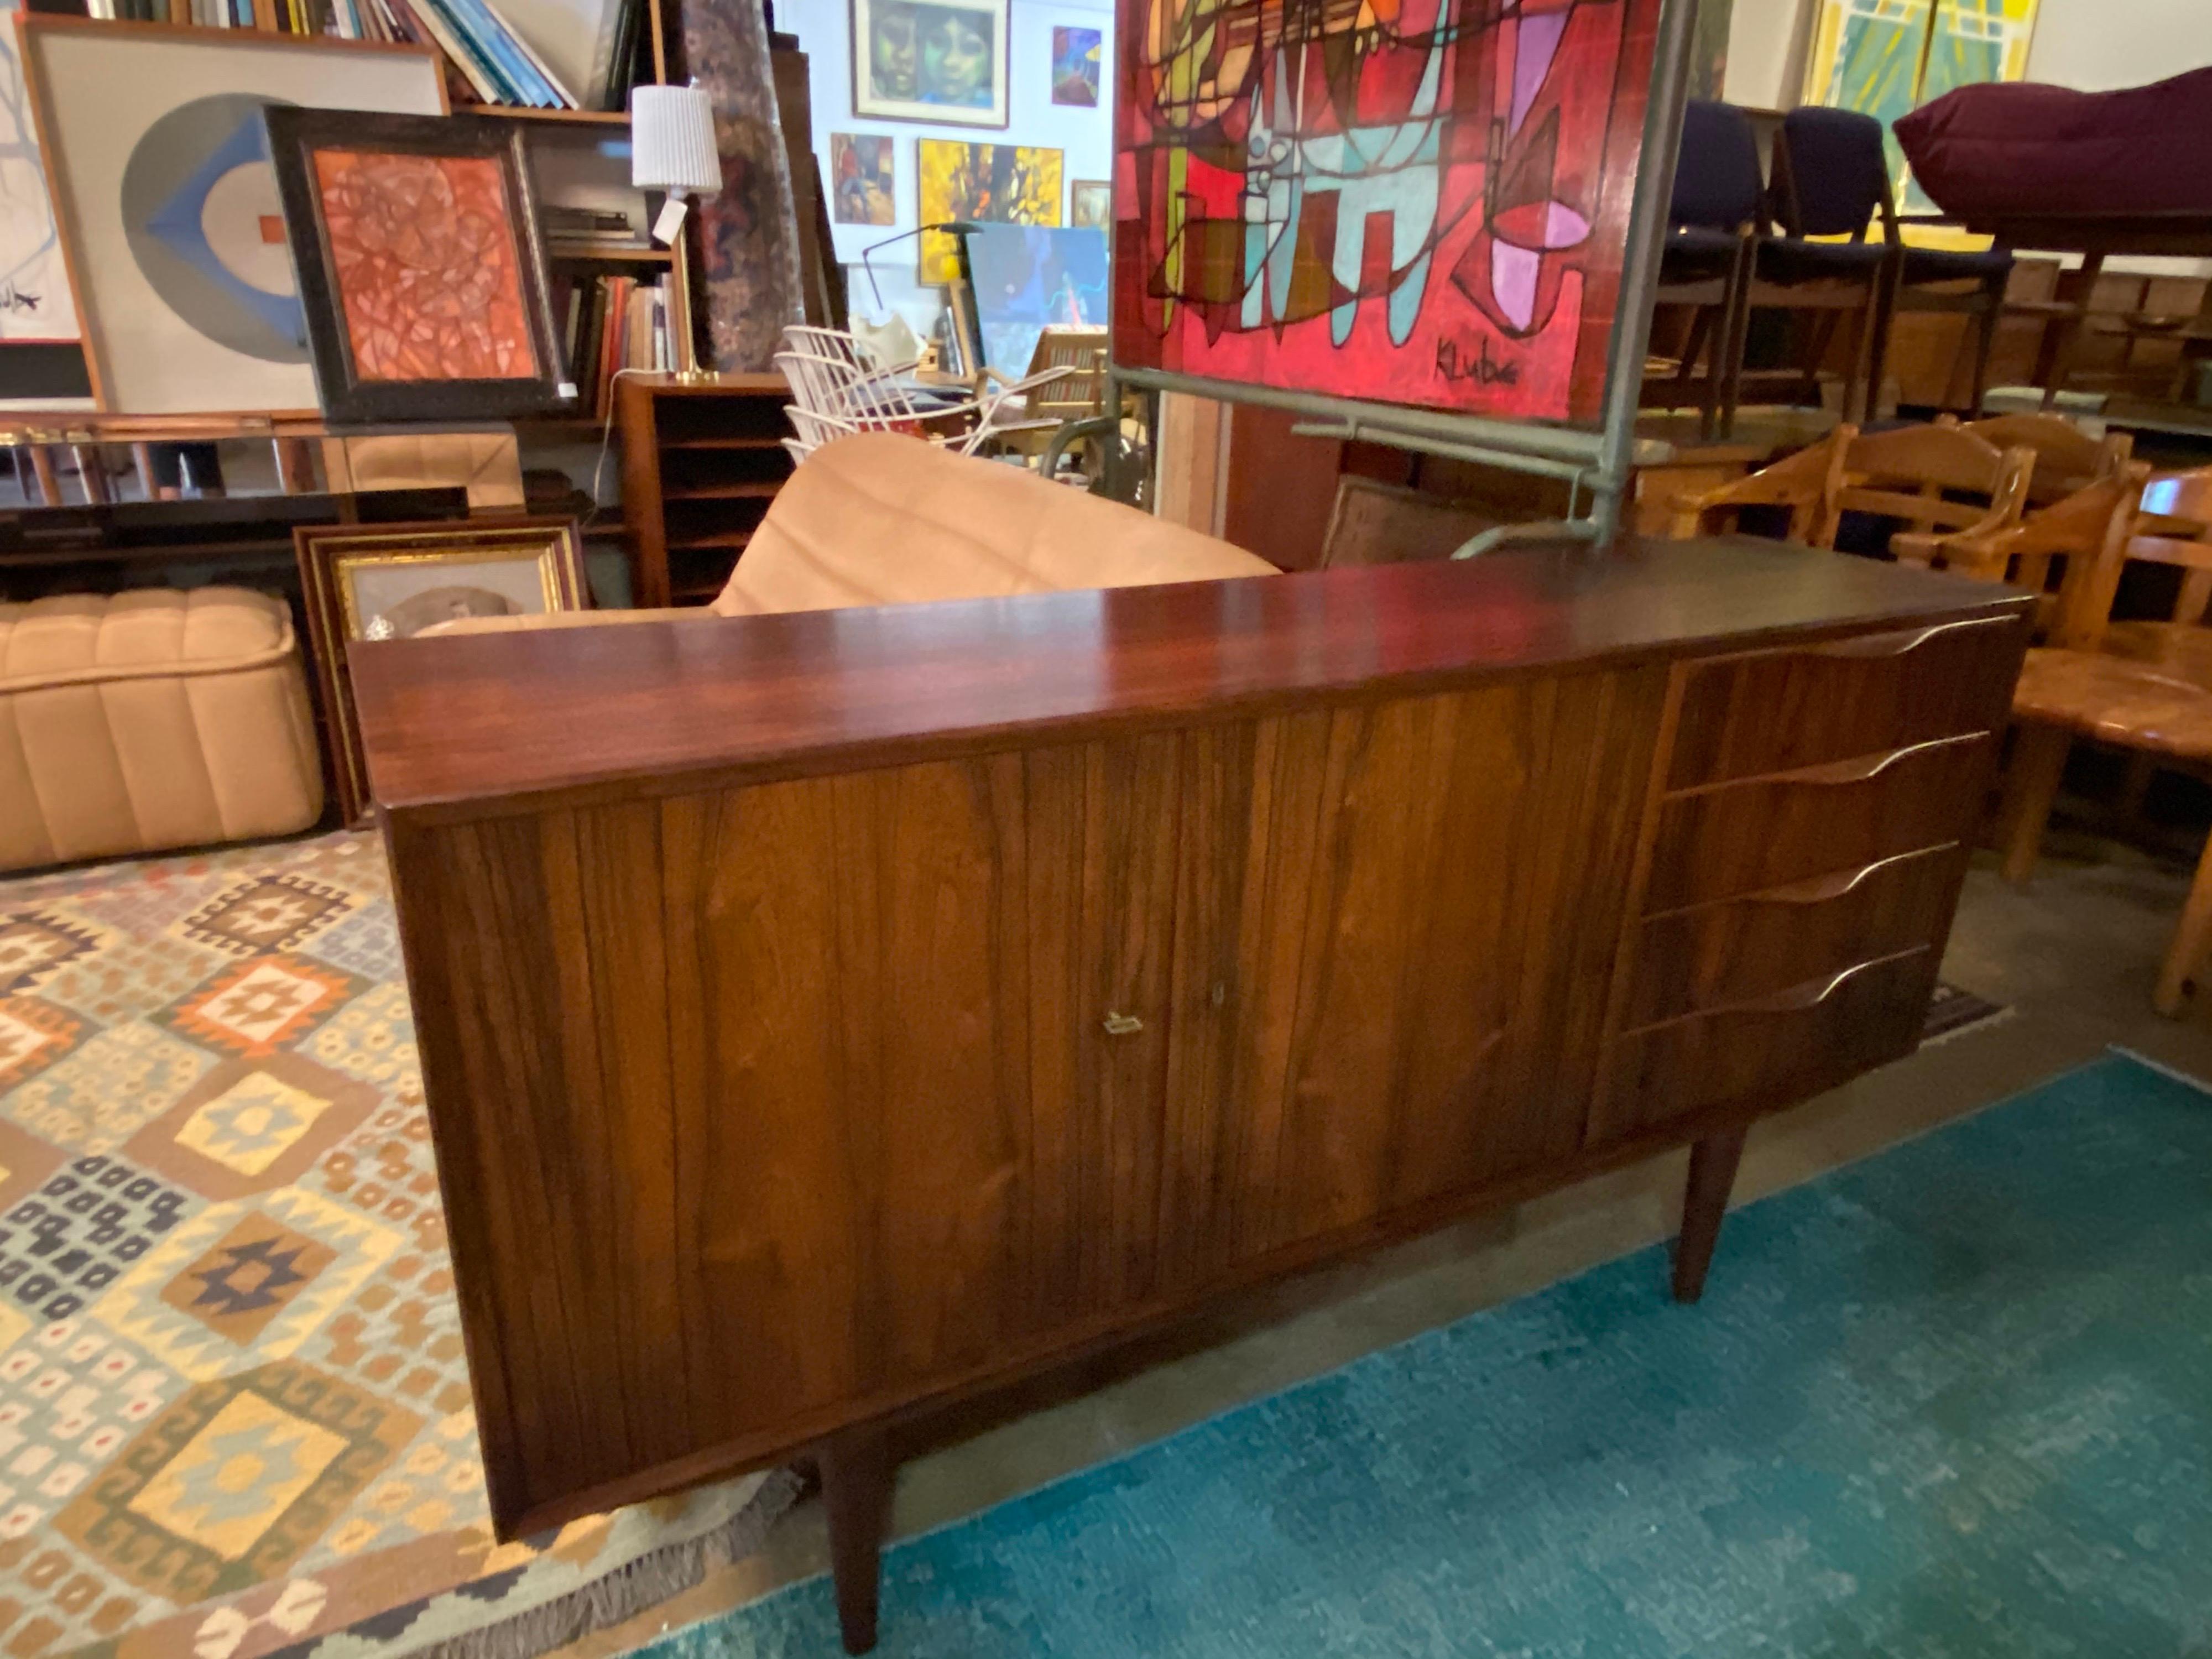 Beautiful Mid-Century Modern Brazillian rosewood credenza sideboard features four drawers with sculpted handles and a total of four shelves for storing. This small mid-century credenza is perfect for small and large spaces and is in great overall